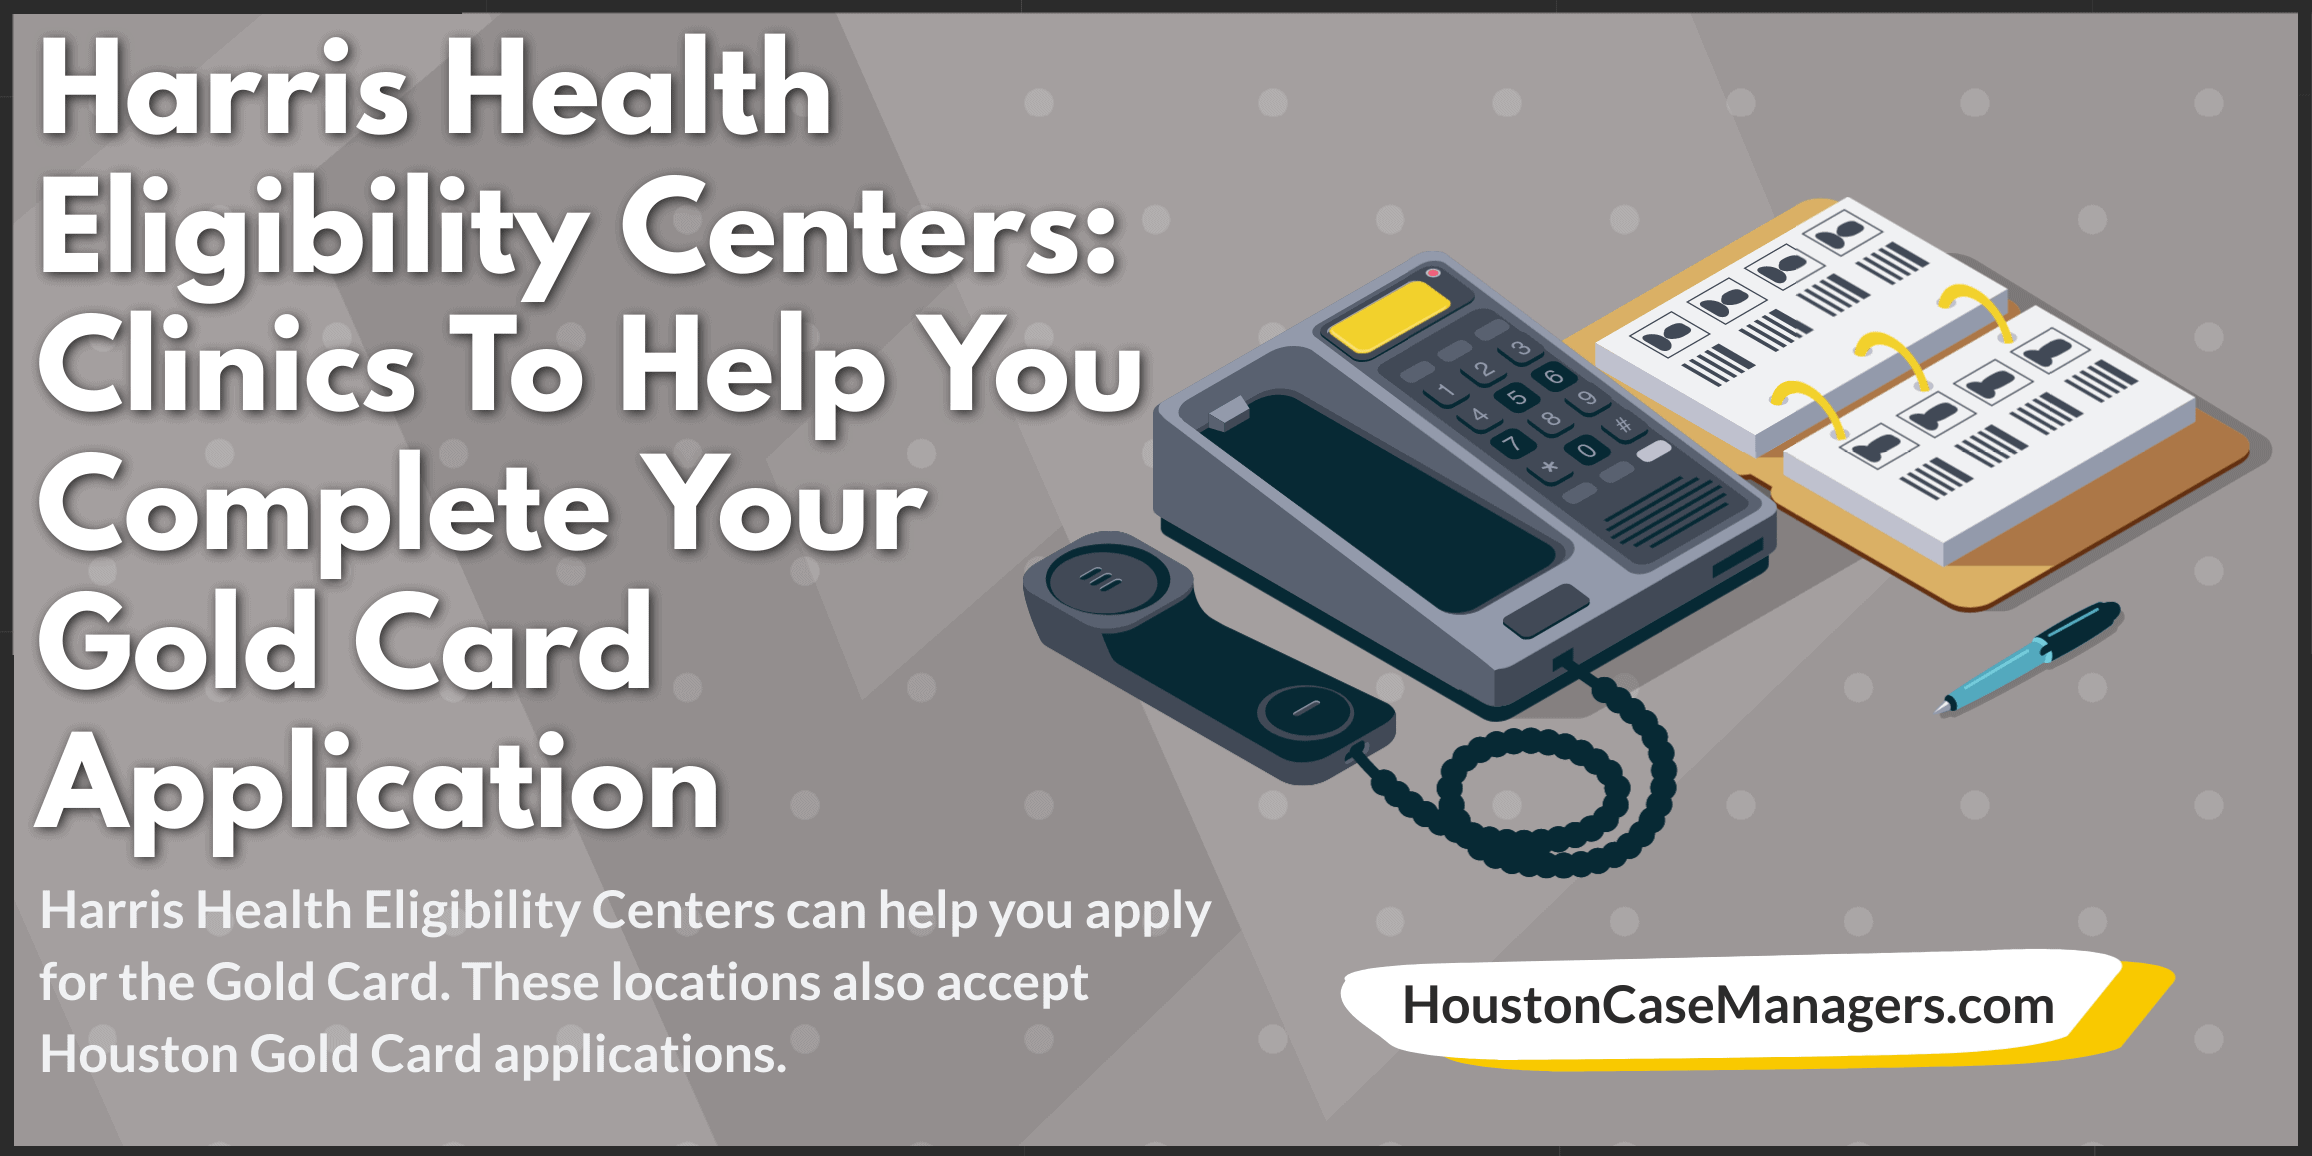 Harris Health Eligibility Centers: Help With Gold Card Application